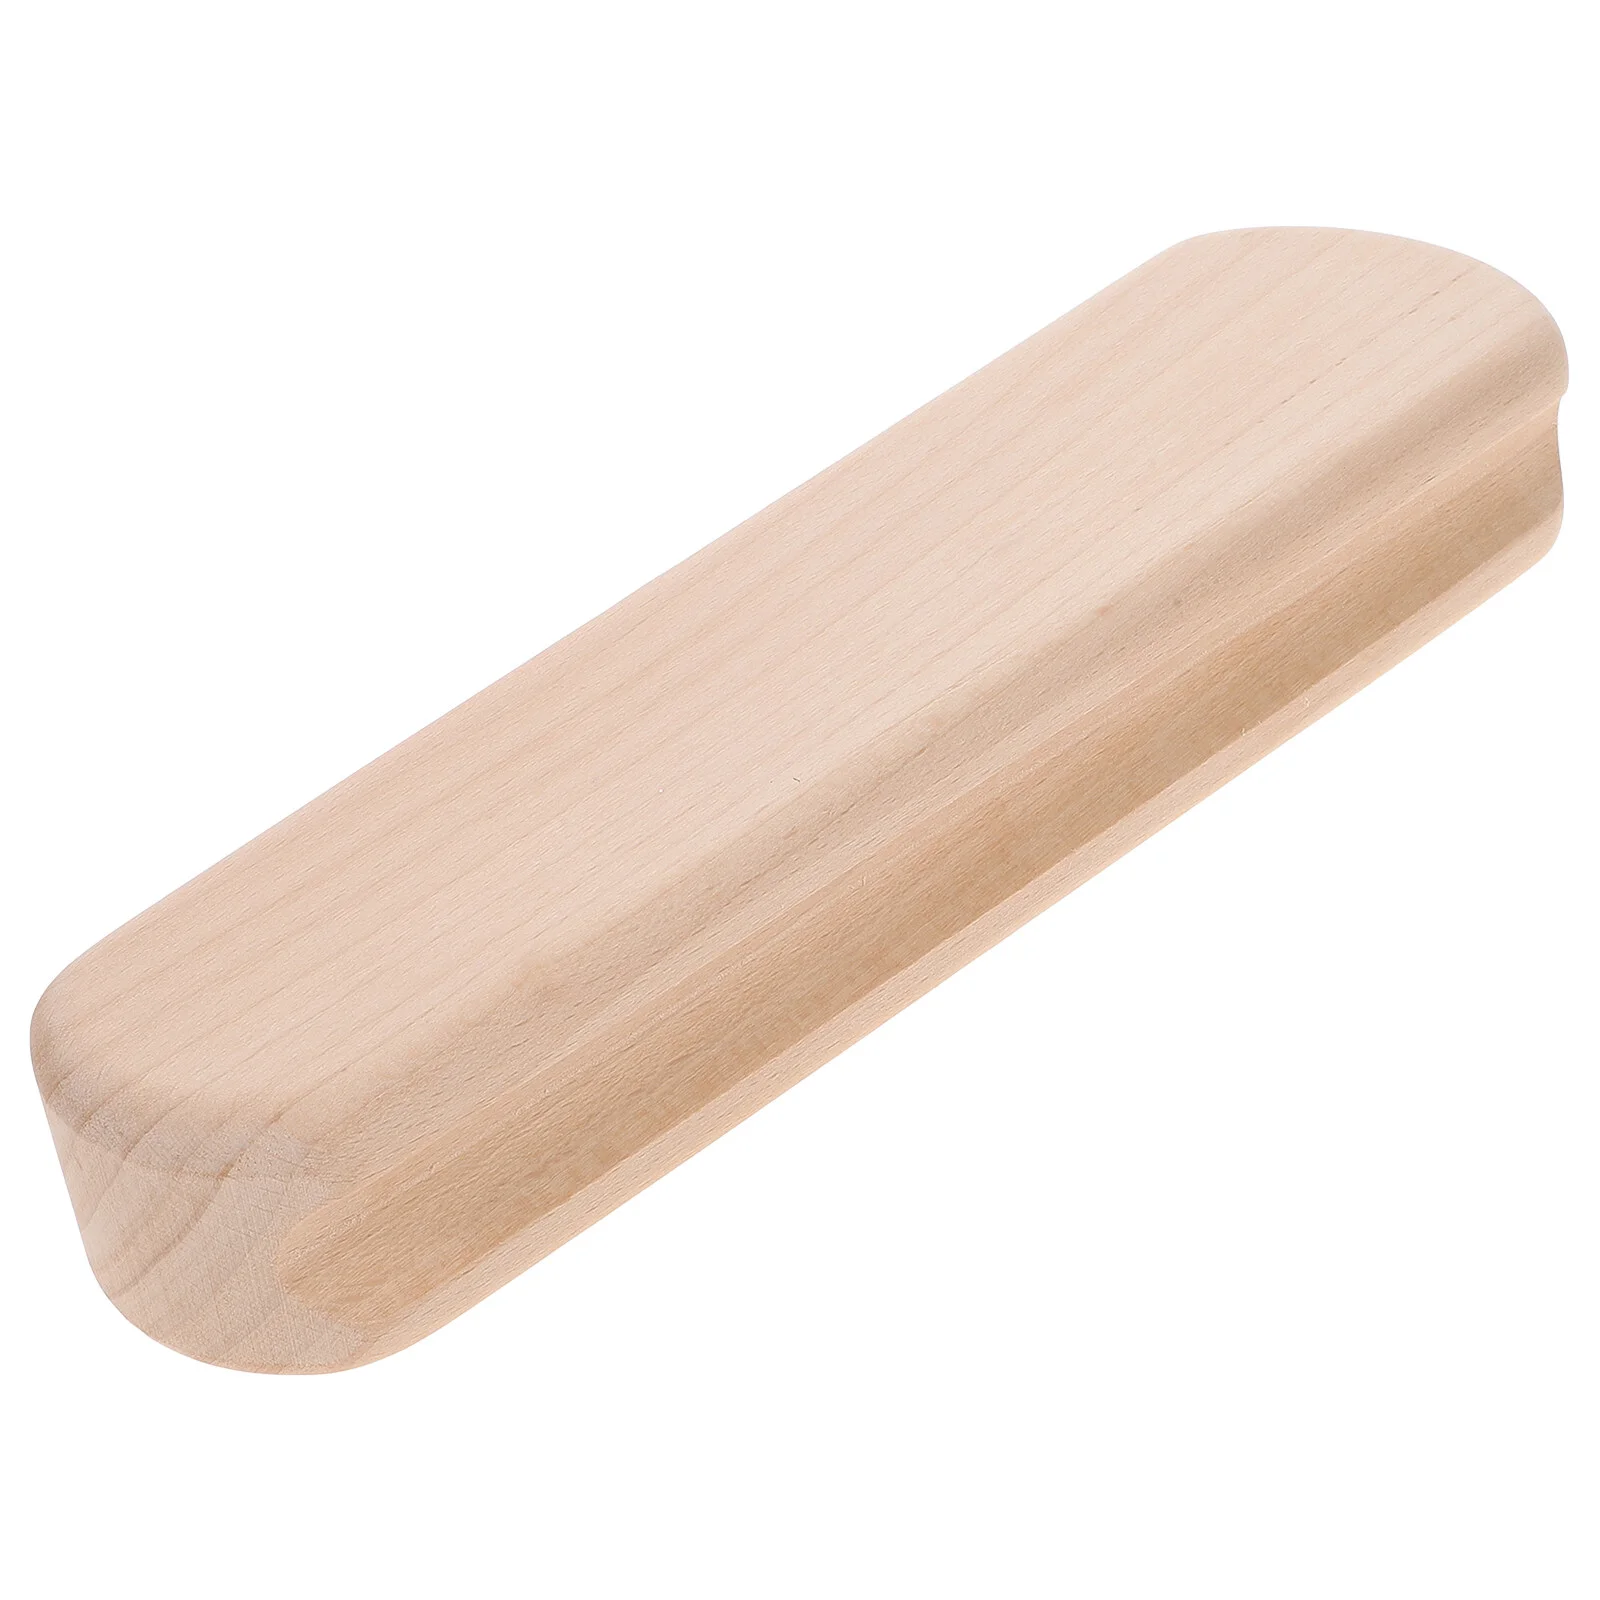 Tailor Clapper Tool Beech Wood Tailors Clapper For Ironing